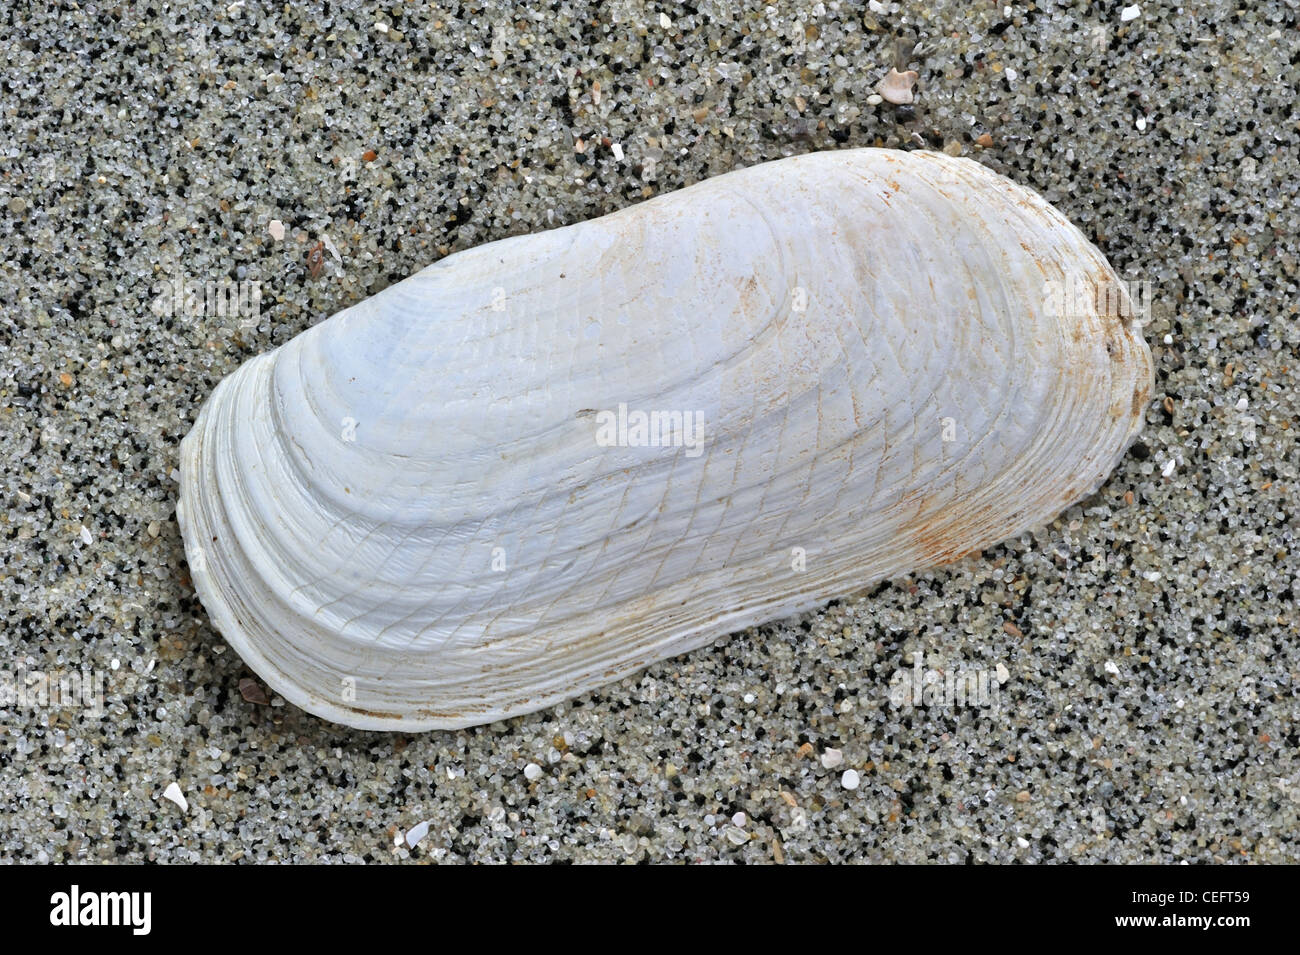 Oblong otter clam / Oblong otter-shell (Lutraria magna) on beach, Brittany, France Stock Photo